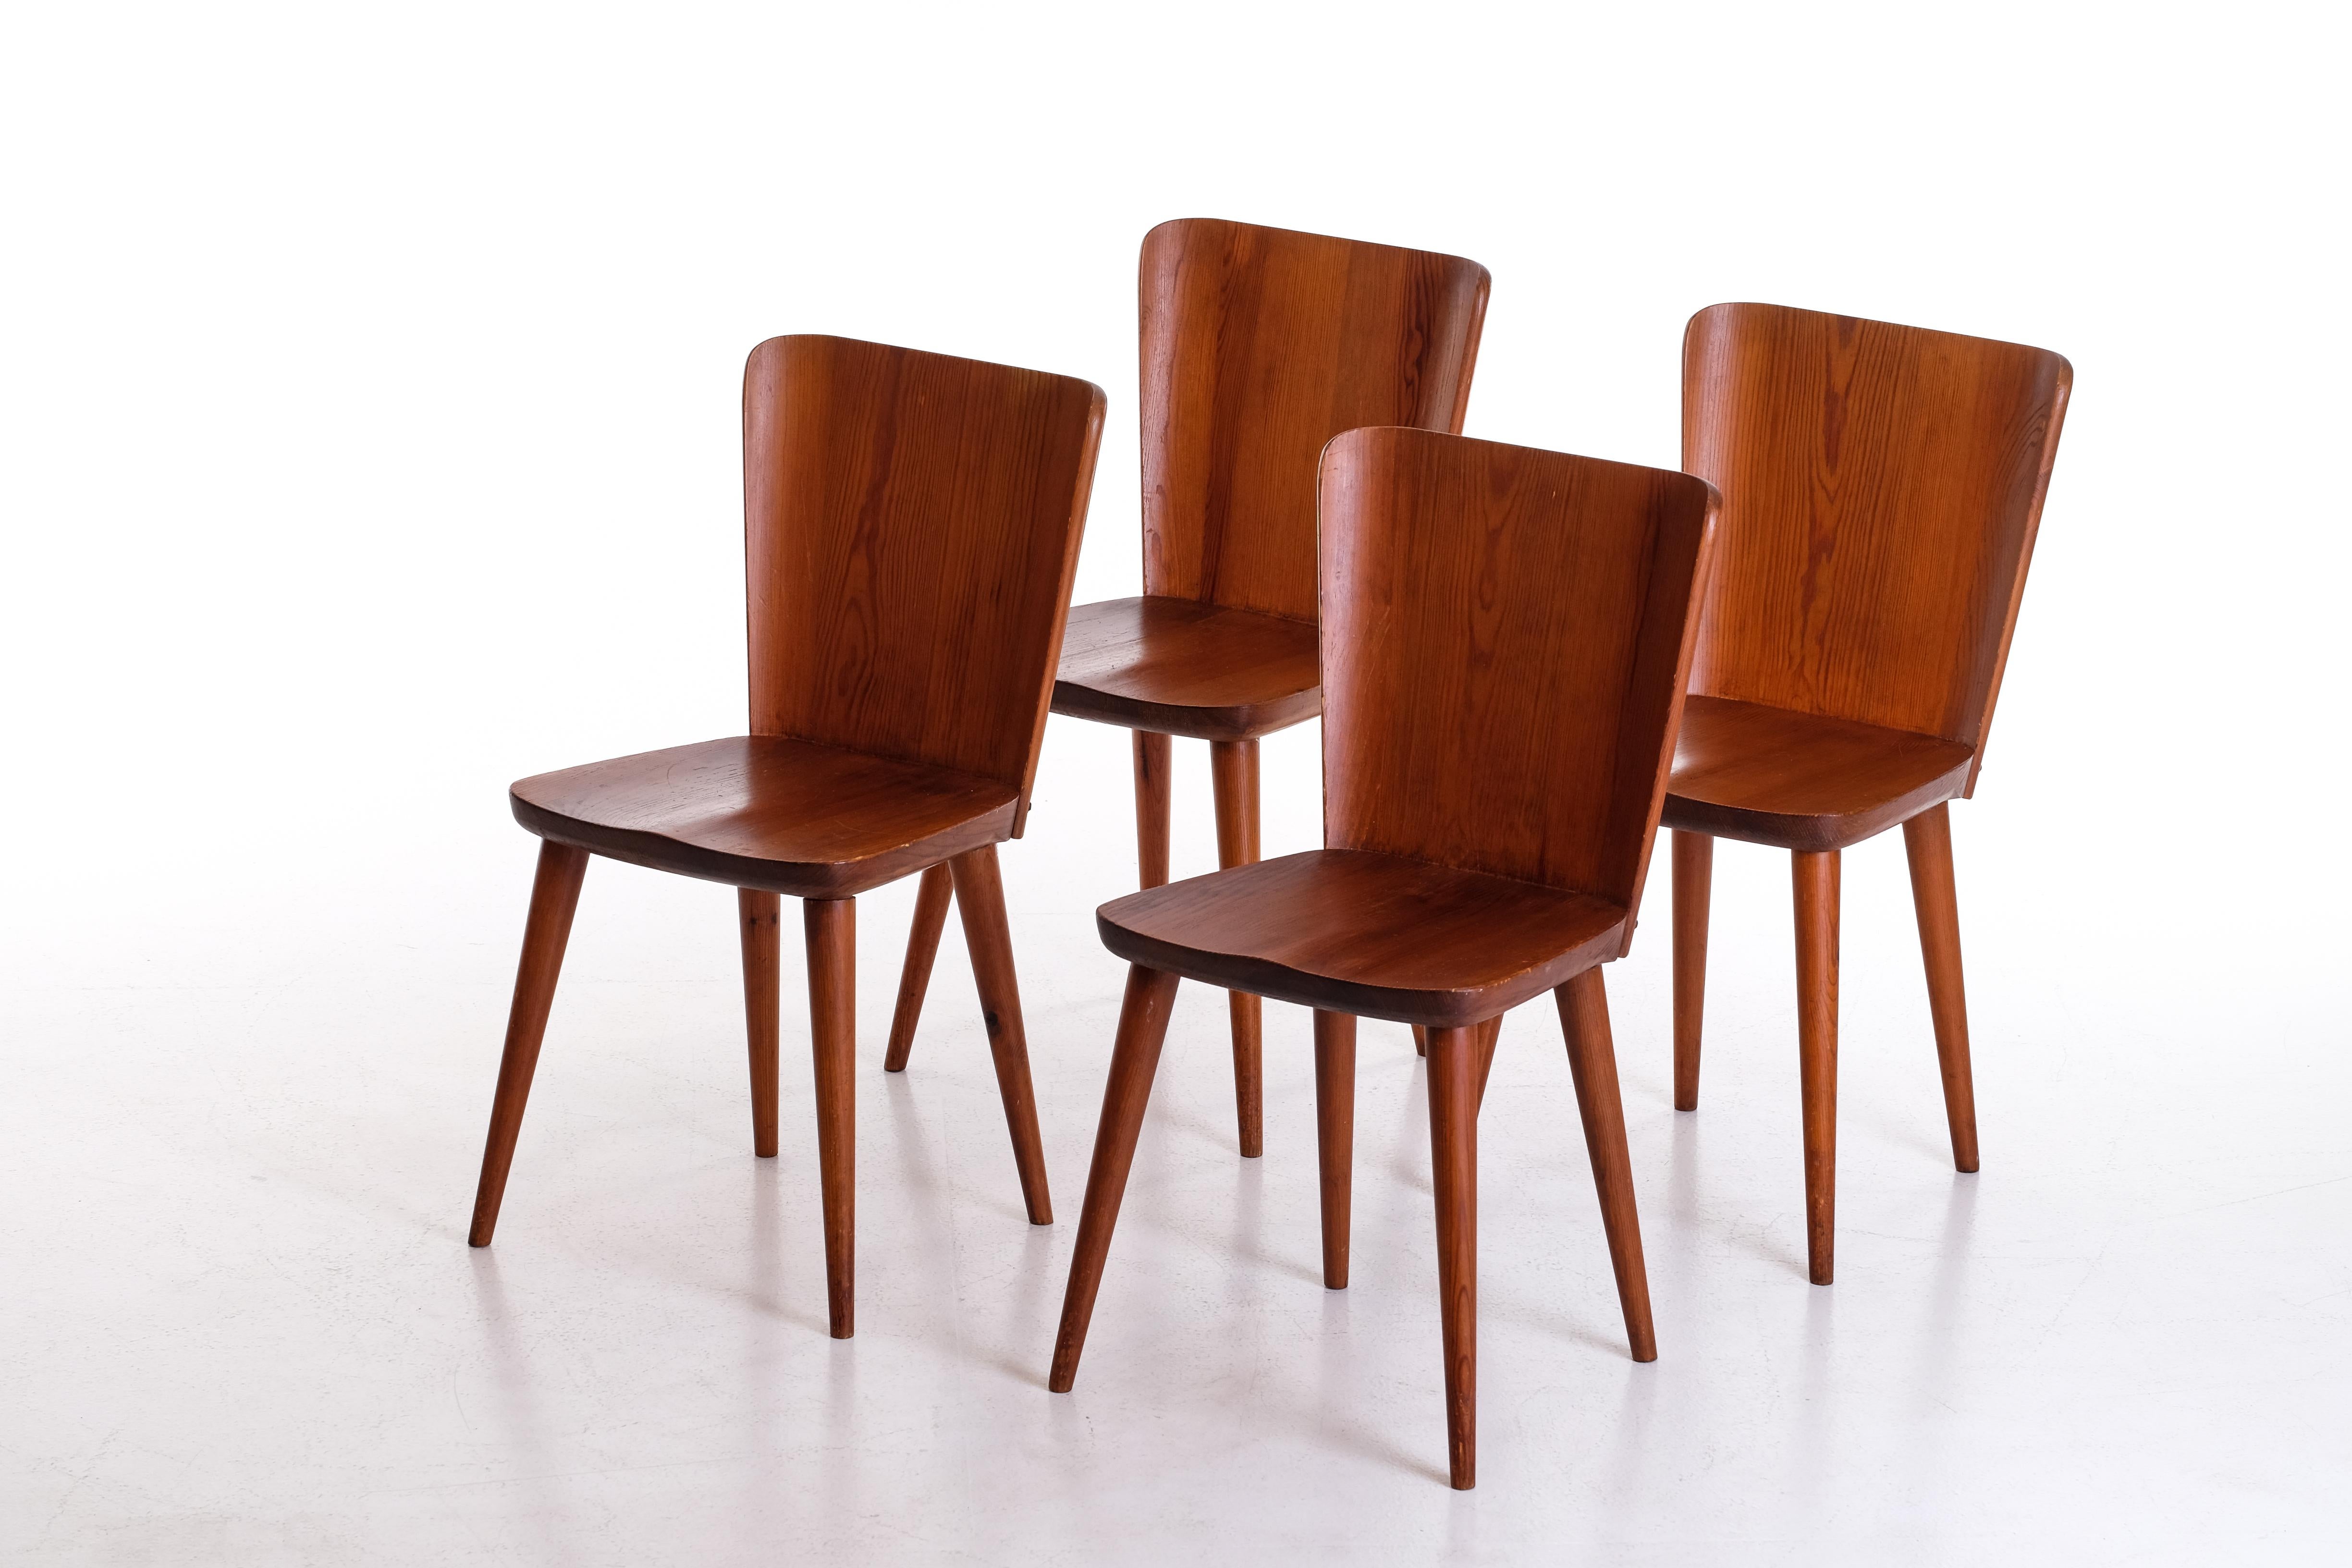 Set of 4 Swedish Pine Chairs by Göran Malmvall, Svensk Fur, 1960s In Good Condition For Sale In Stockholm, SE